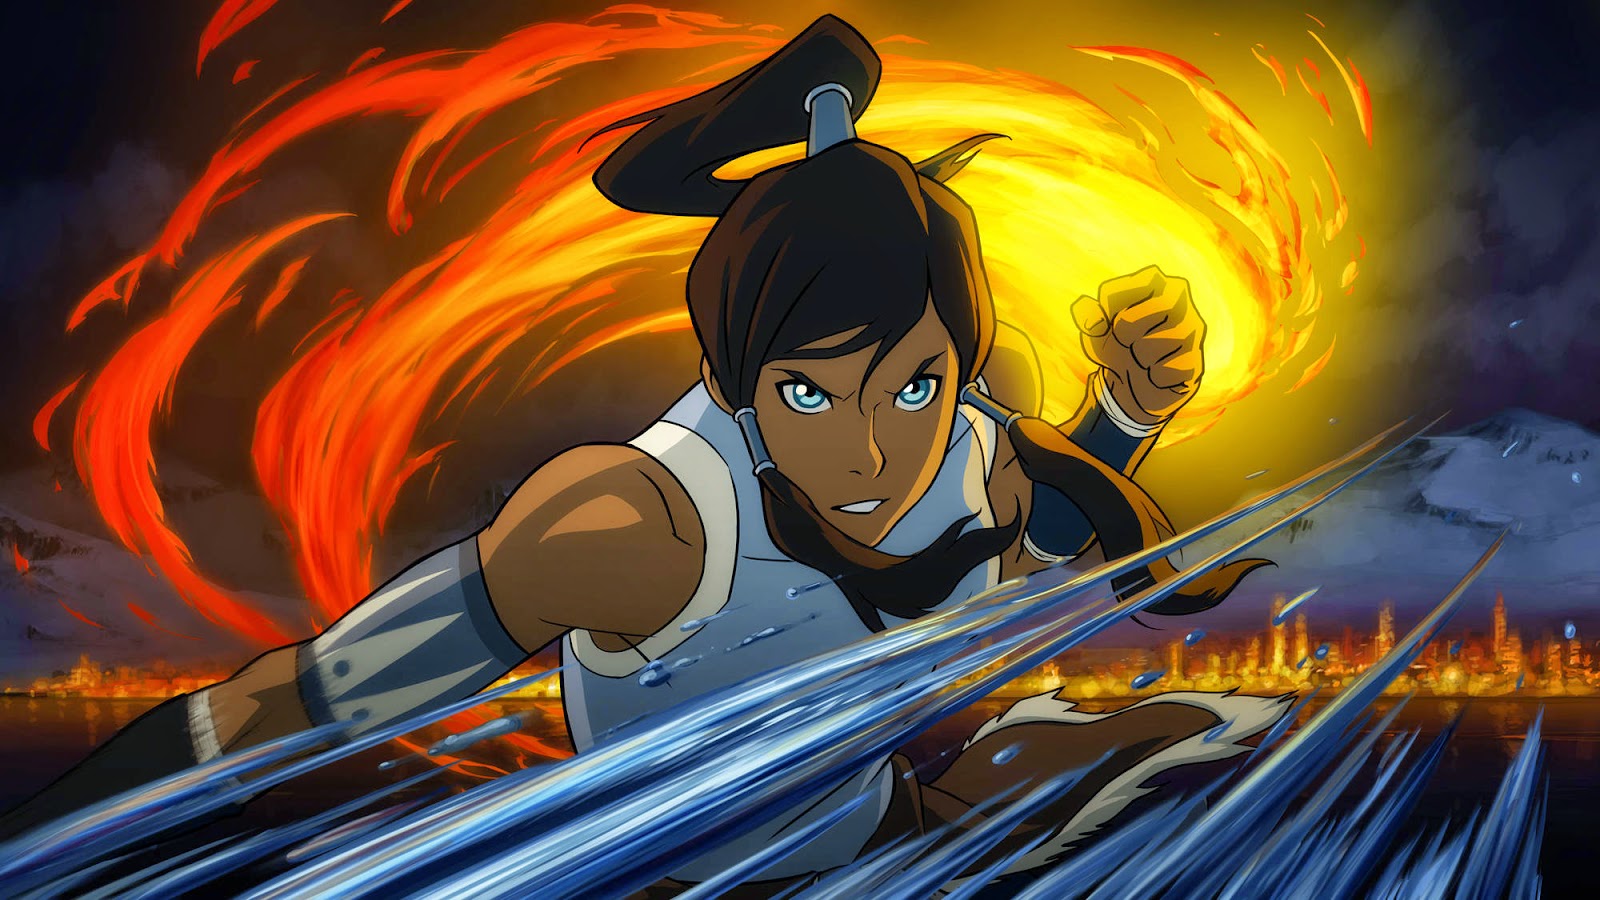 The Legend of Korra - The Day of the Colossus & The Last Stand - Review: "One of the most progressive cartoons of all time comes to a great end"